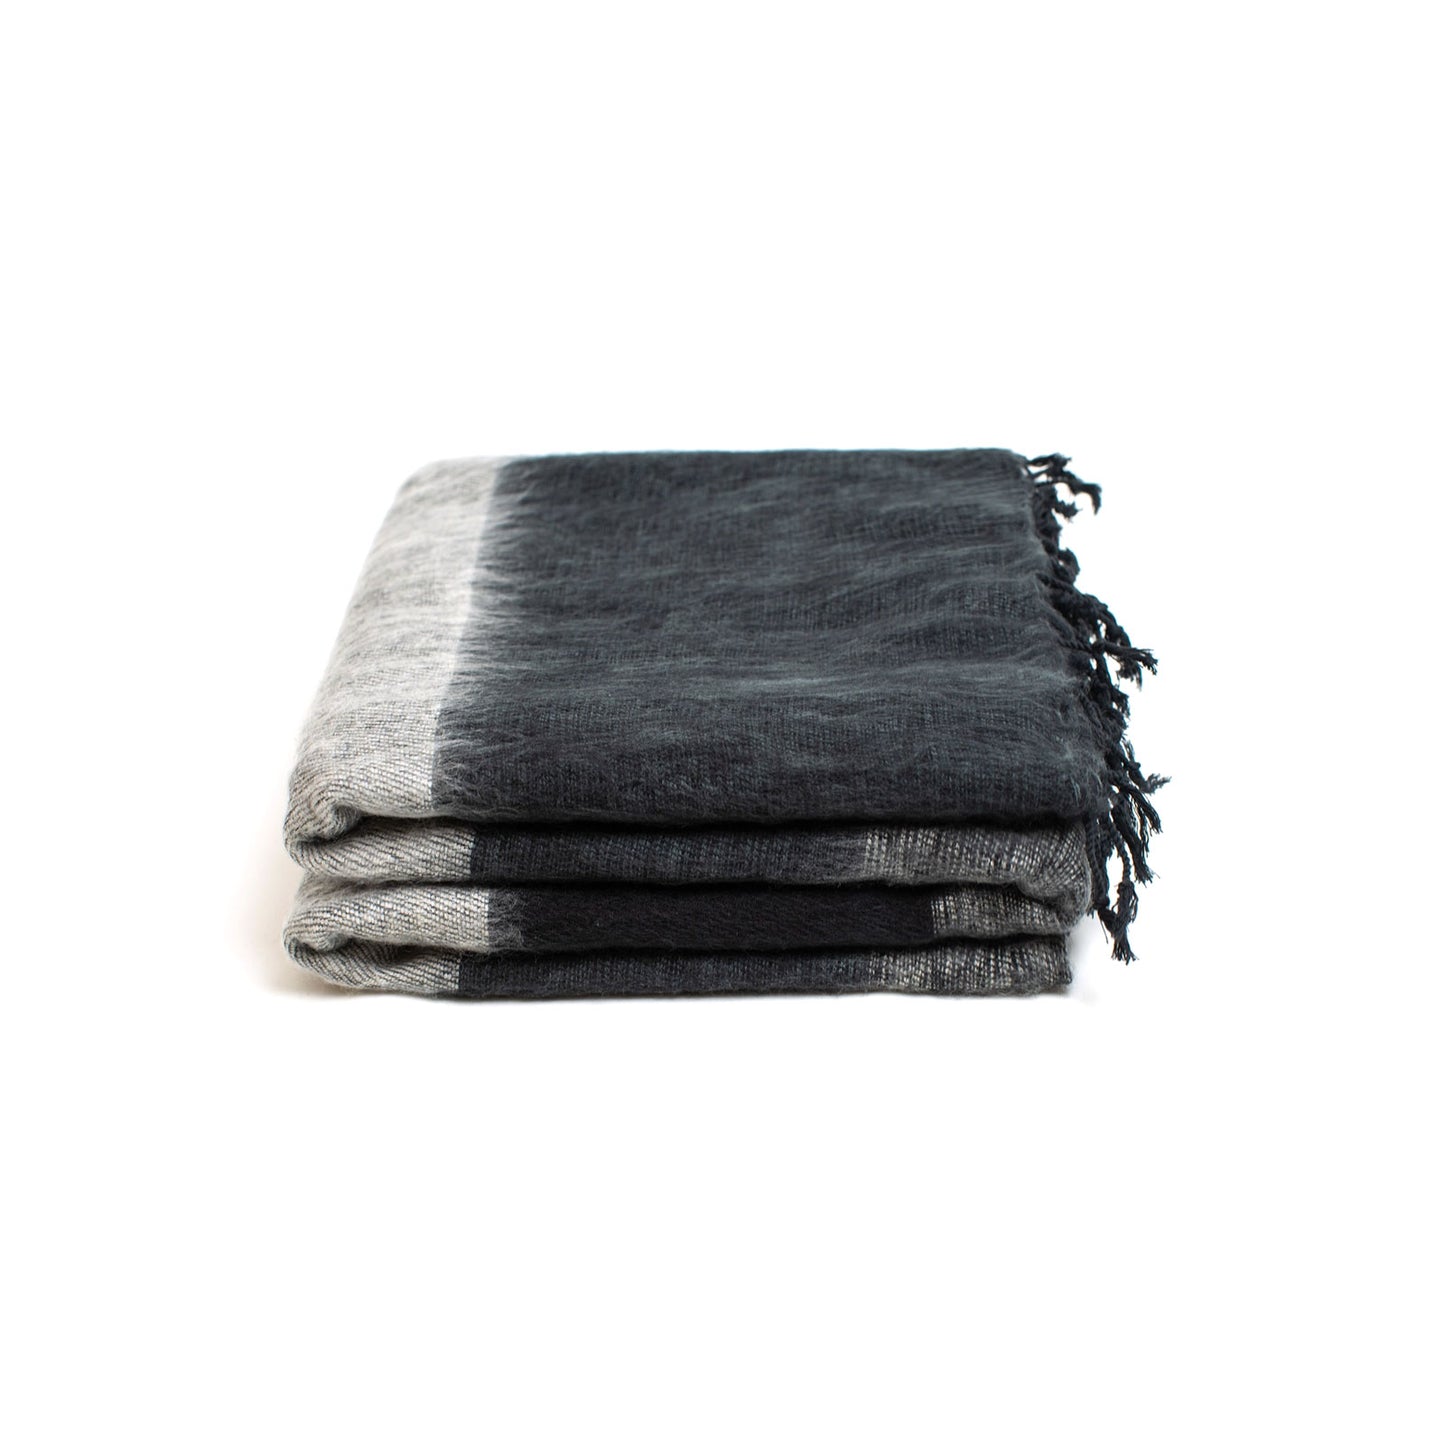 Extra Soft Wool Throw in Black and White